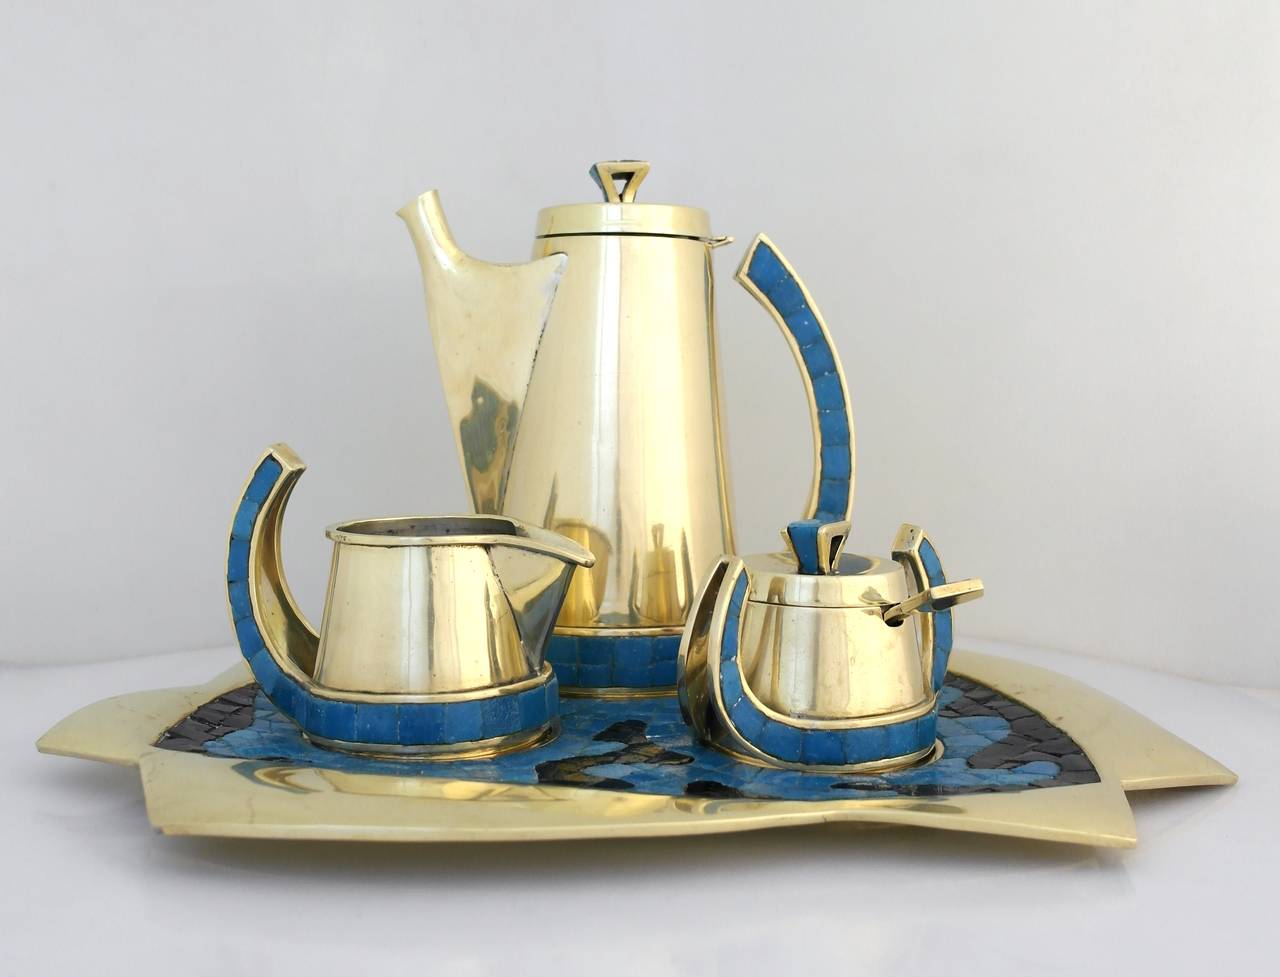 Being offered is an early and rare circa 1970s coffee set by Salvador Teran of Taxco, Mexico, hand-wrought brass and glass mosaic tile coffee service includes coffee server, sugar bowl with lid and spoon, creamer and tray. Marked. In excellent